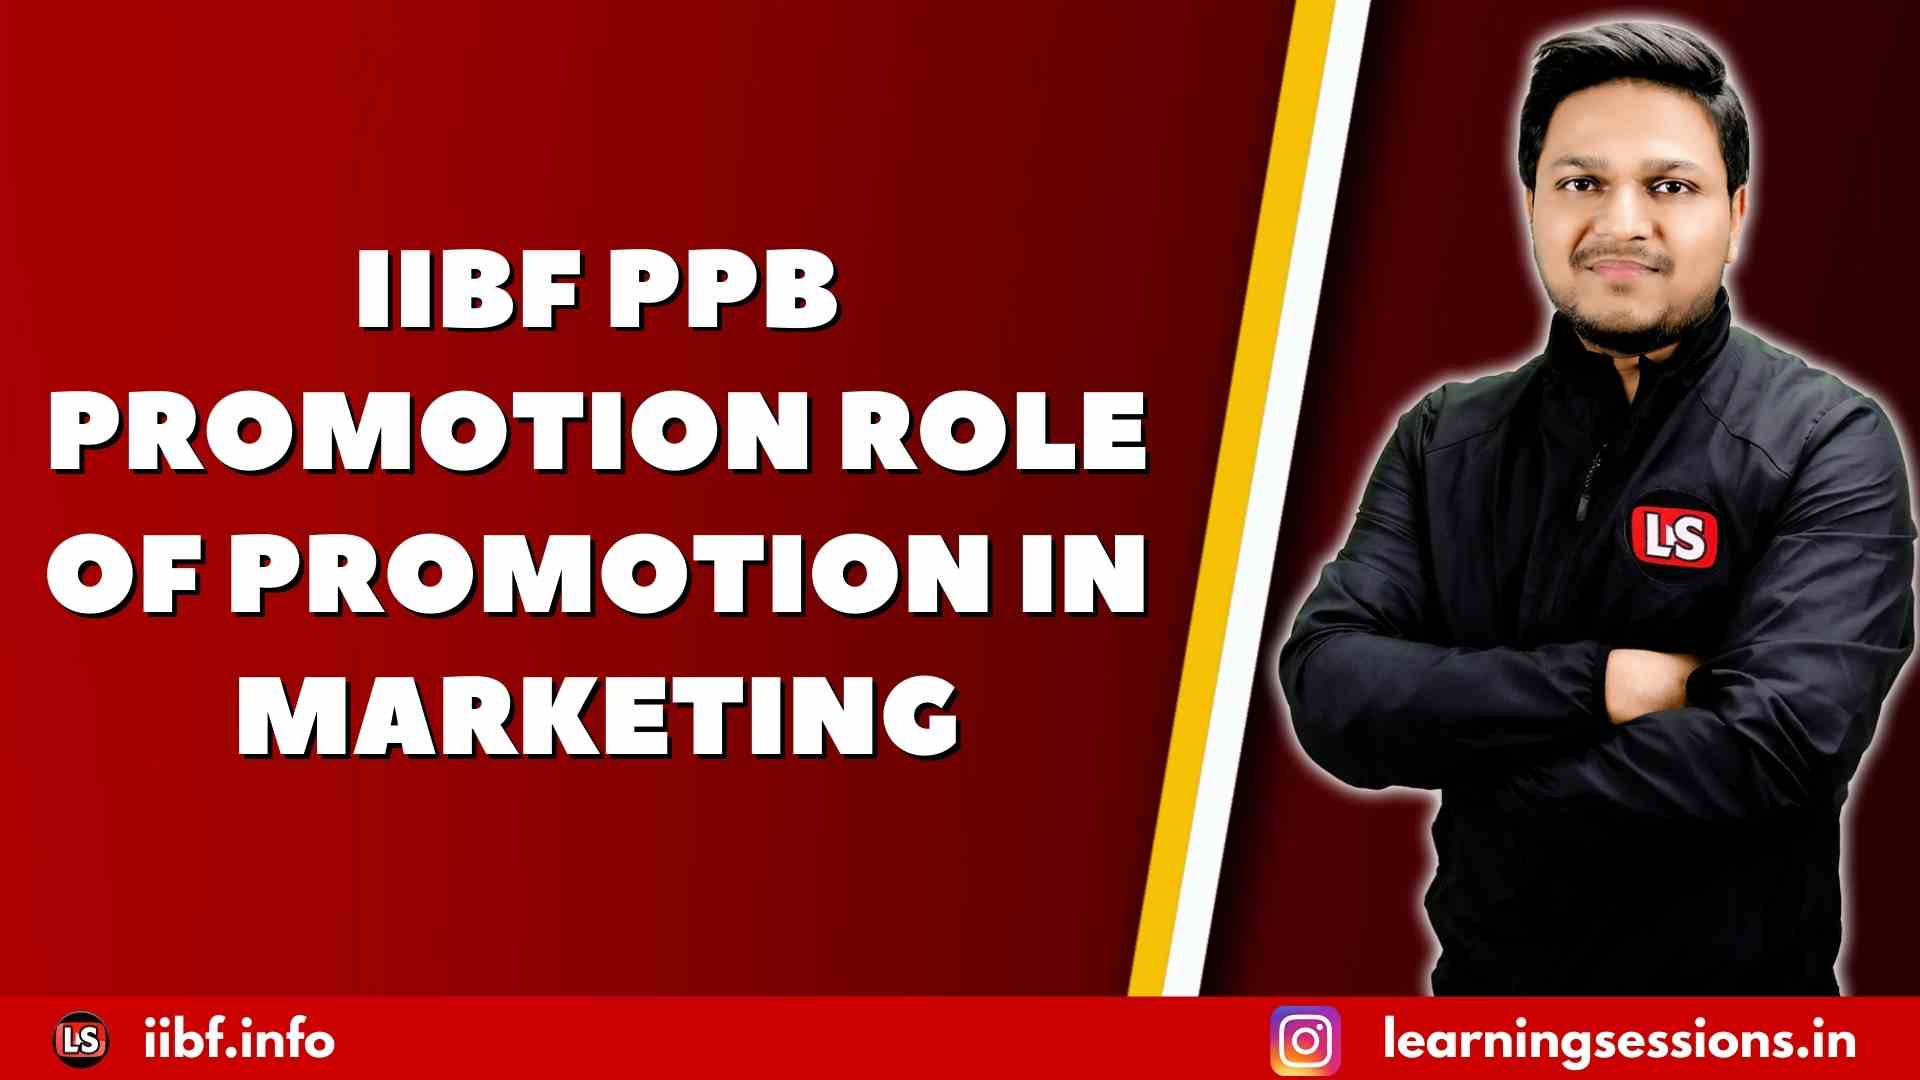 IIBF PPB | PROMOTION | ROLE OF PROMOTION IN MARKETING